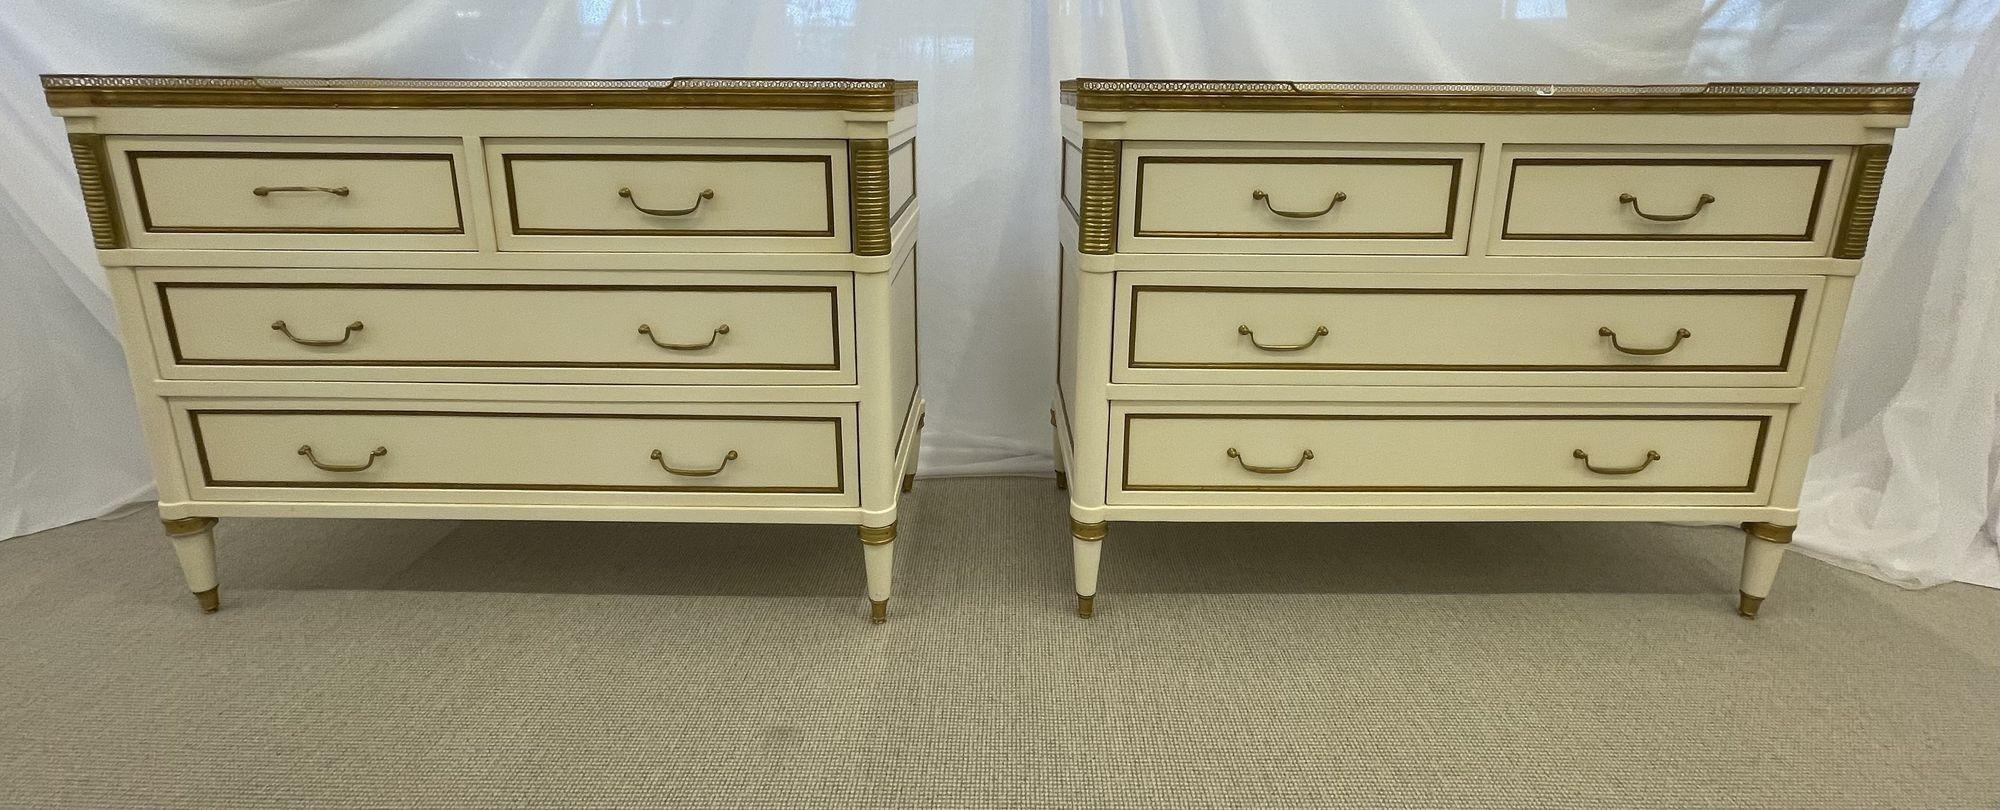 Pair of Cream Painted Louis XVI Style Commodes, Nightstands, Dressers, Chests In Good Condition For Sale In Stamford, CT